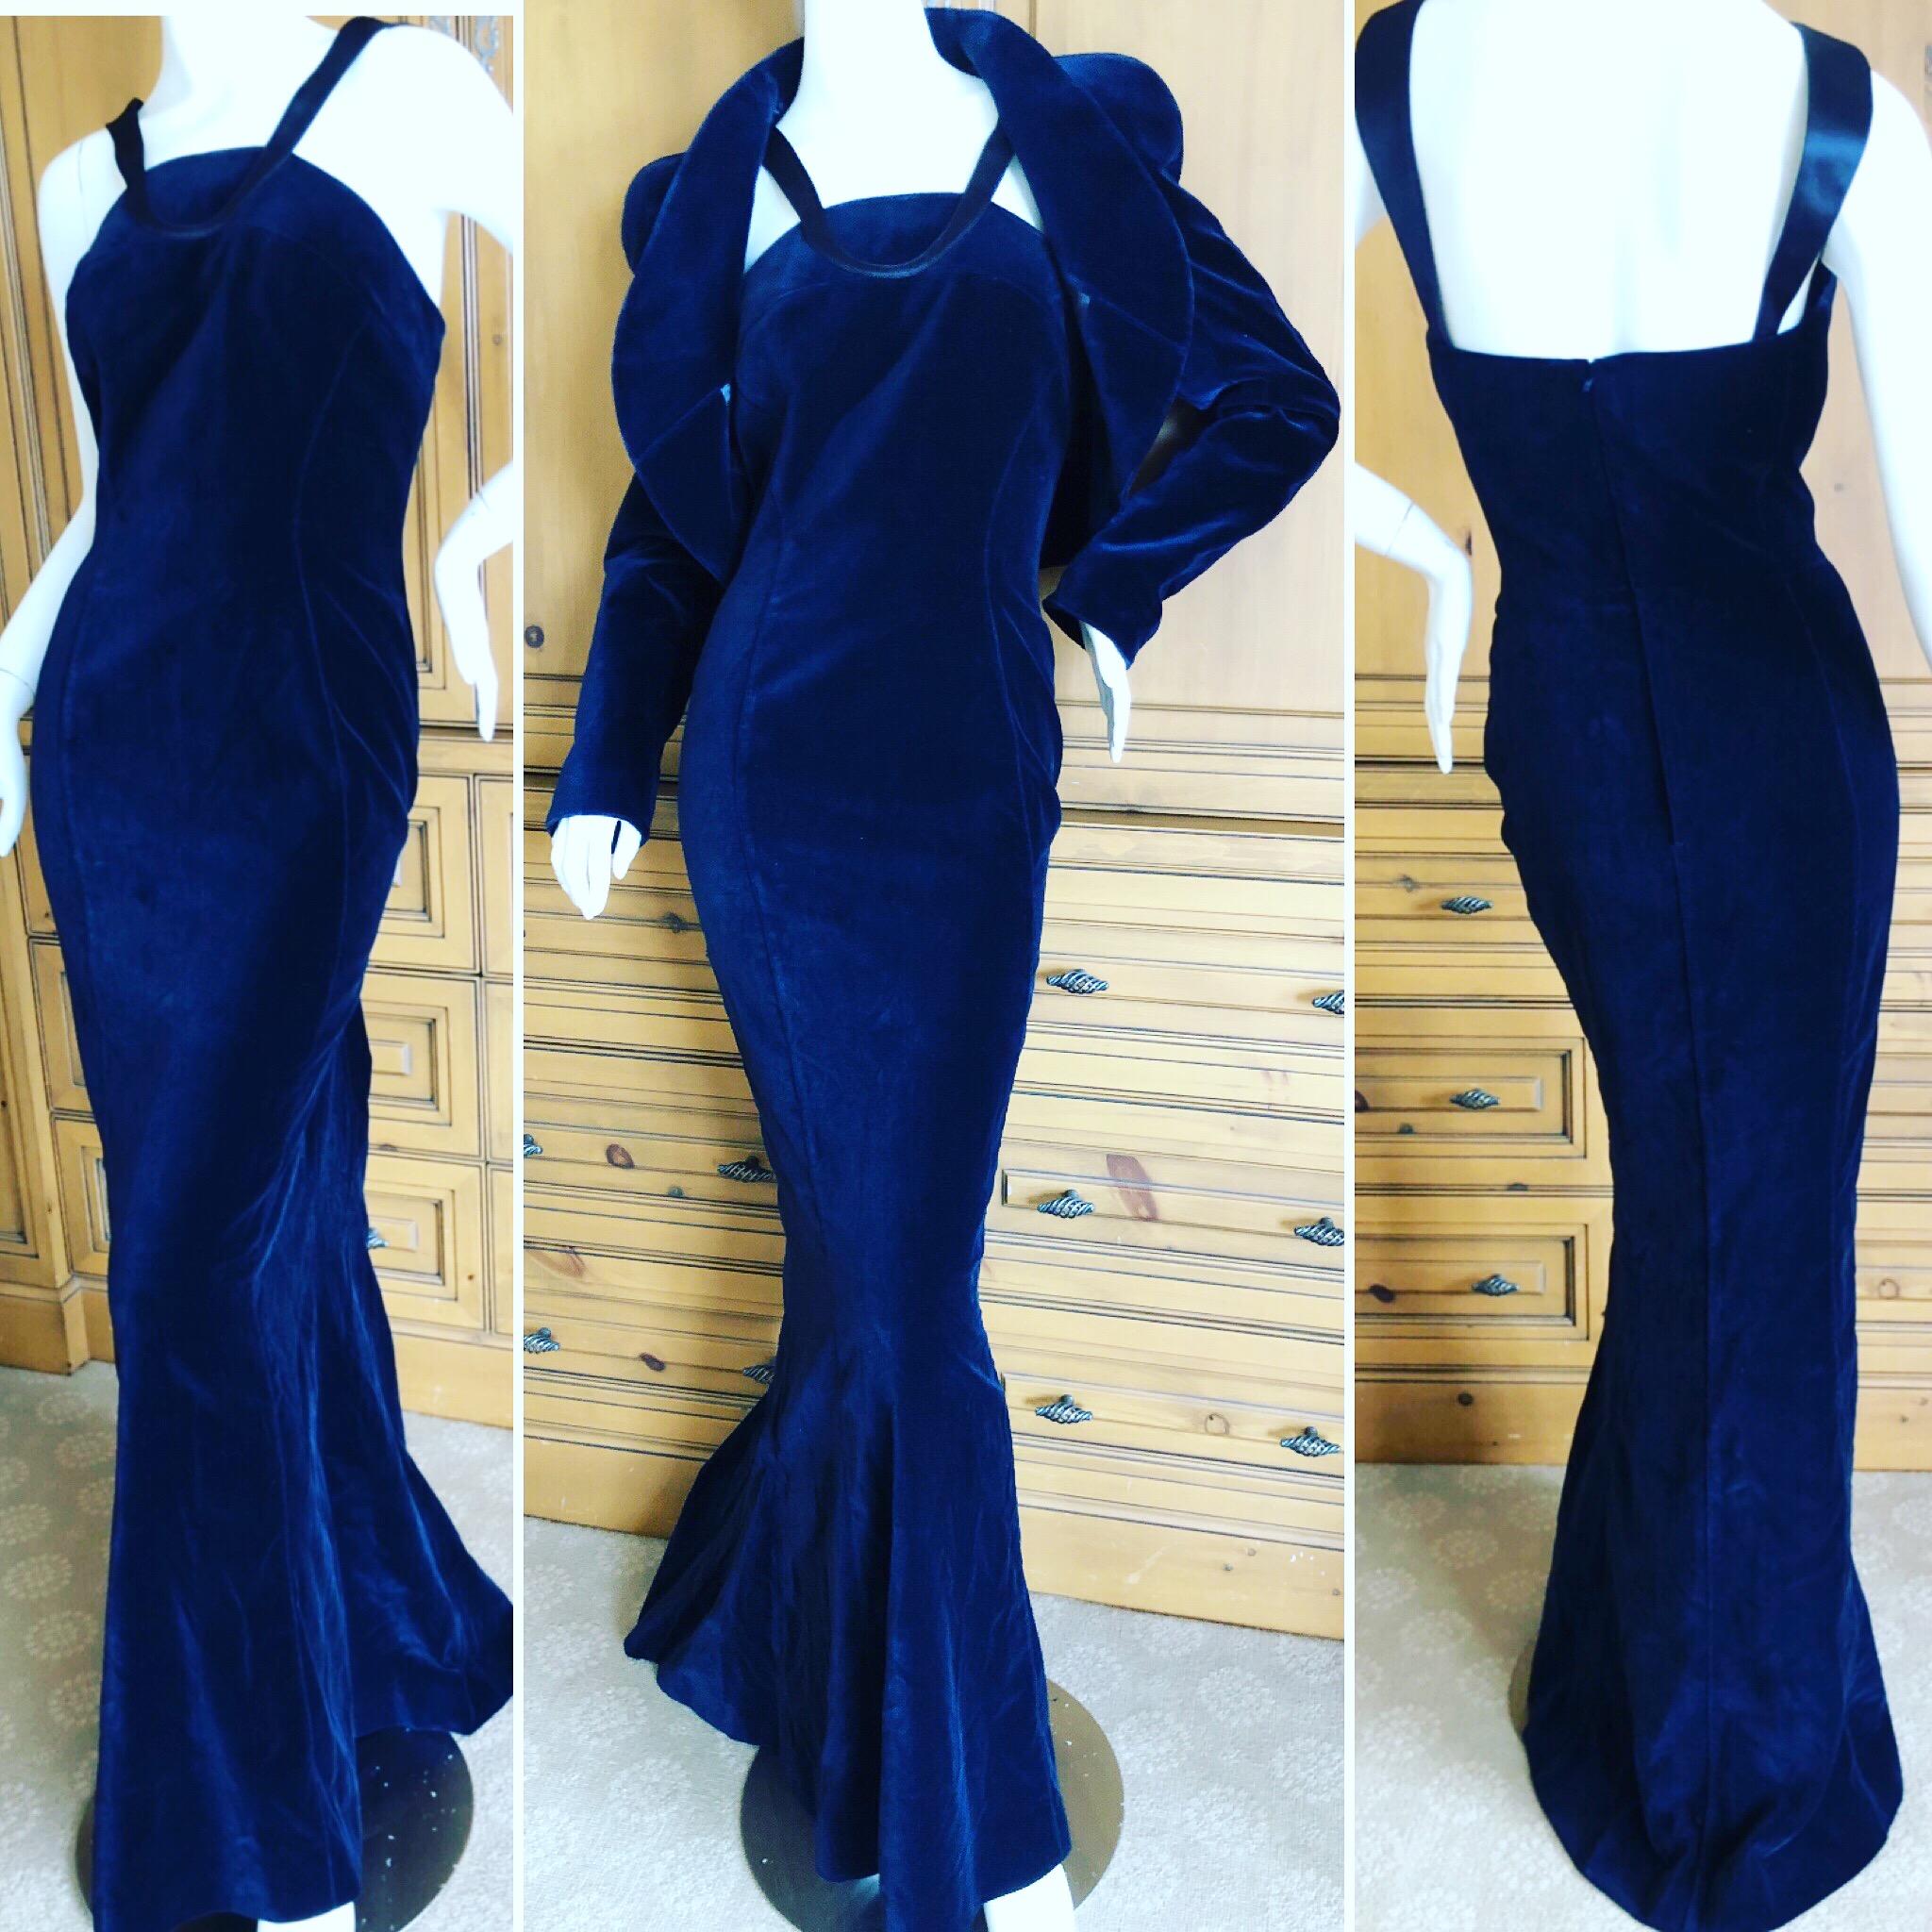 Thierry Mugler Vintage Blue Velvet Mermaid Evening Dress Matching Bolero Unworn w Tags 
Classic Mugler in a hard to find real size.
Size 44
Bust 38